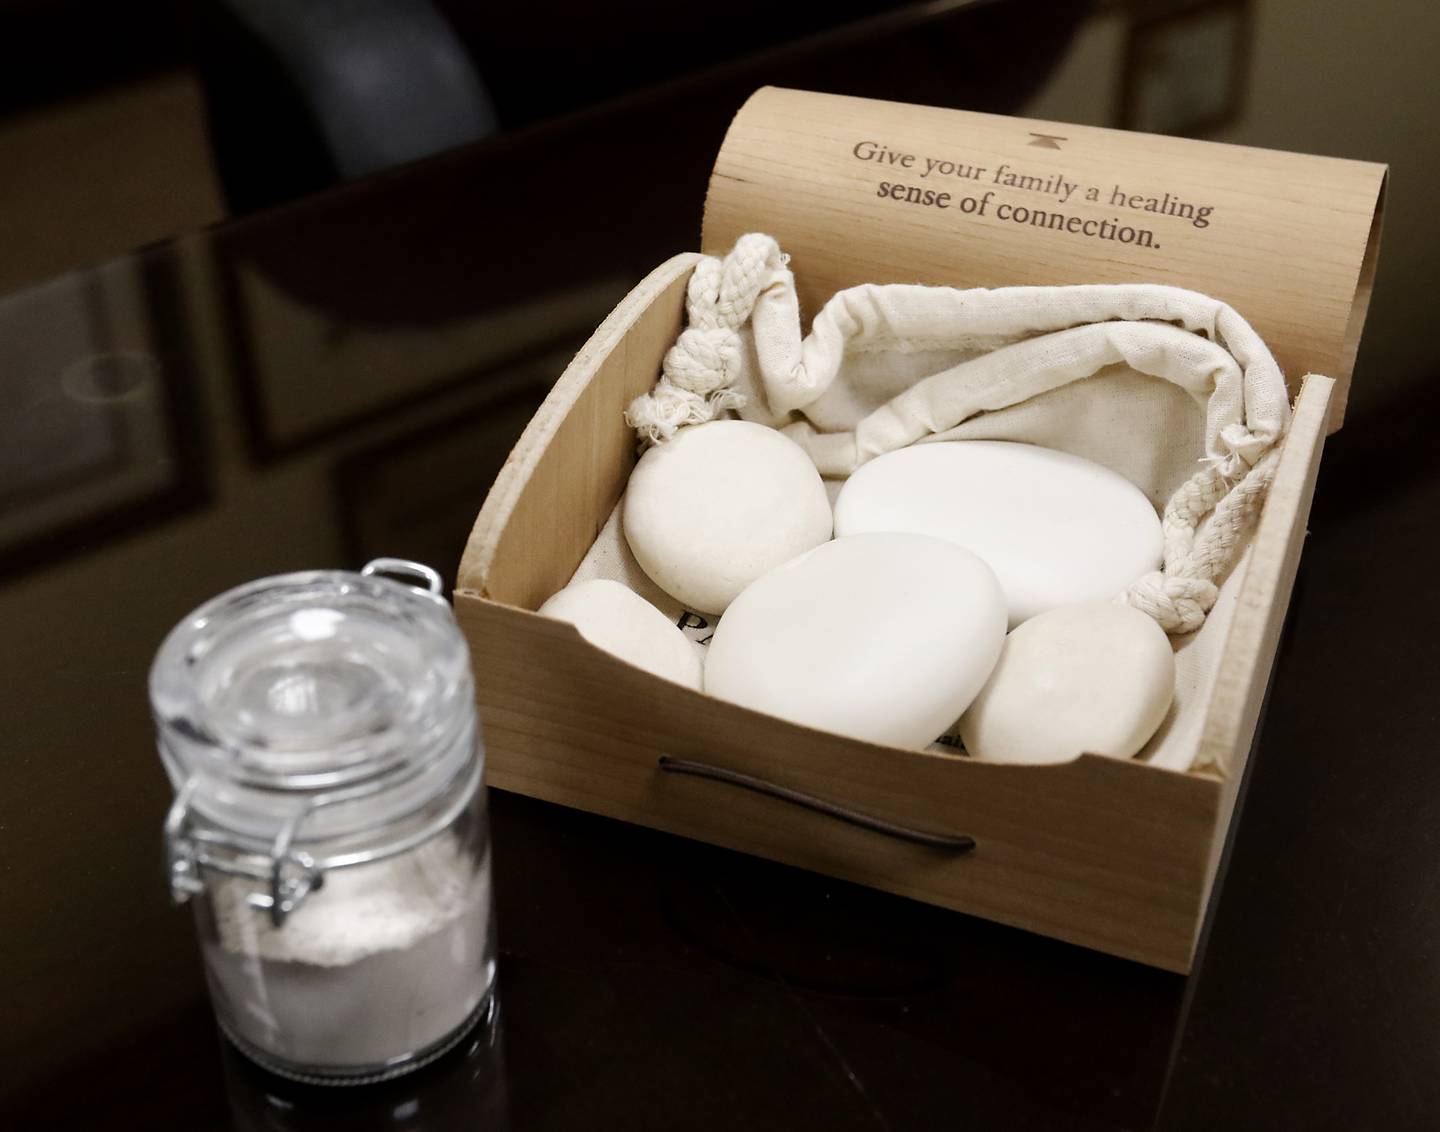 Ashes made into a rock form is a new product being offered by Justen Funeral Home & Crematory in McHenry. The funeral home is looking to the future, trying to address what families want with new products and services.